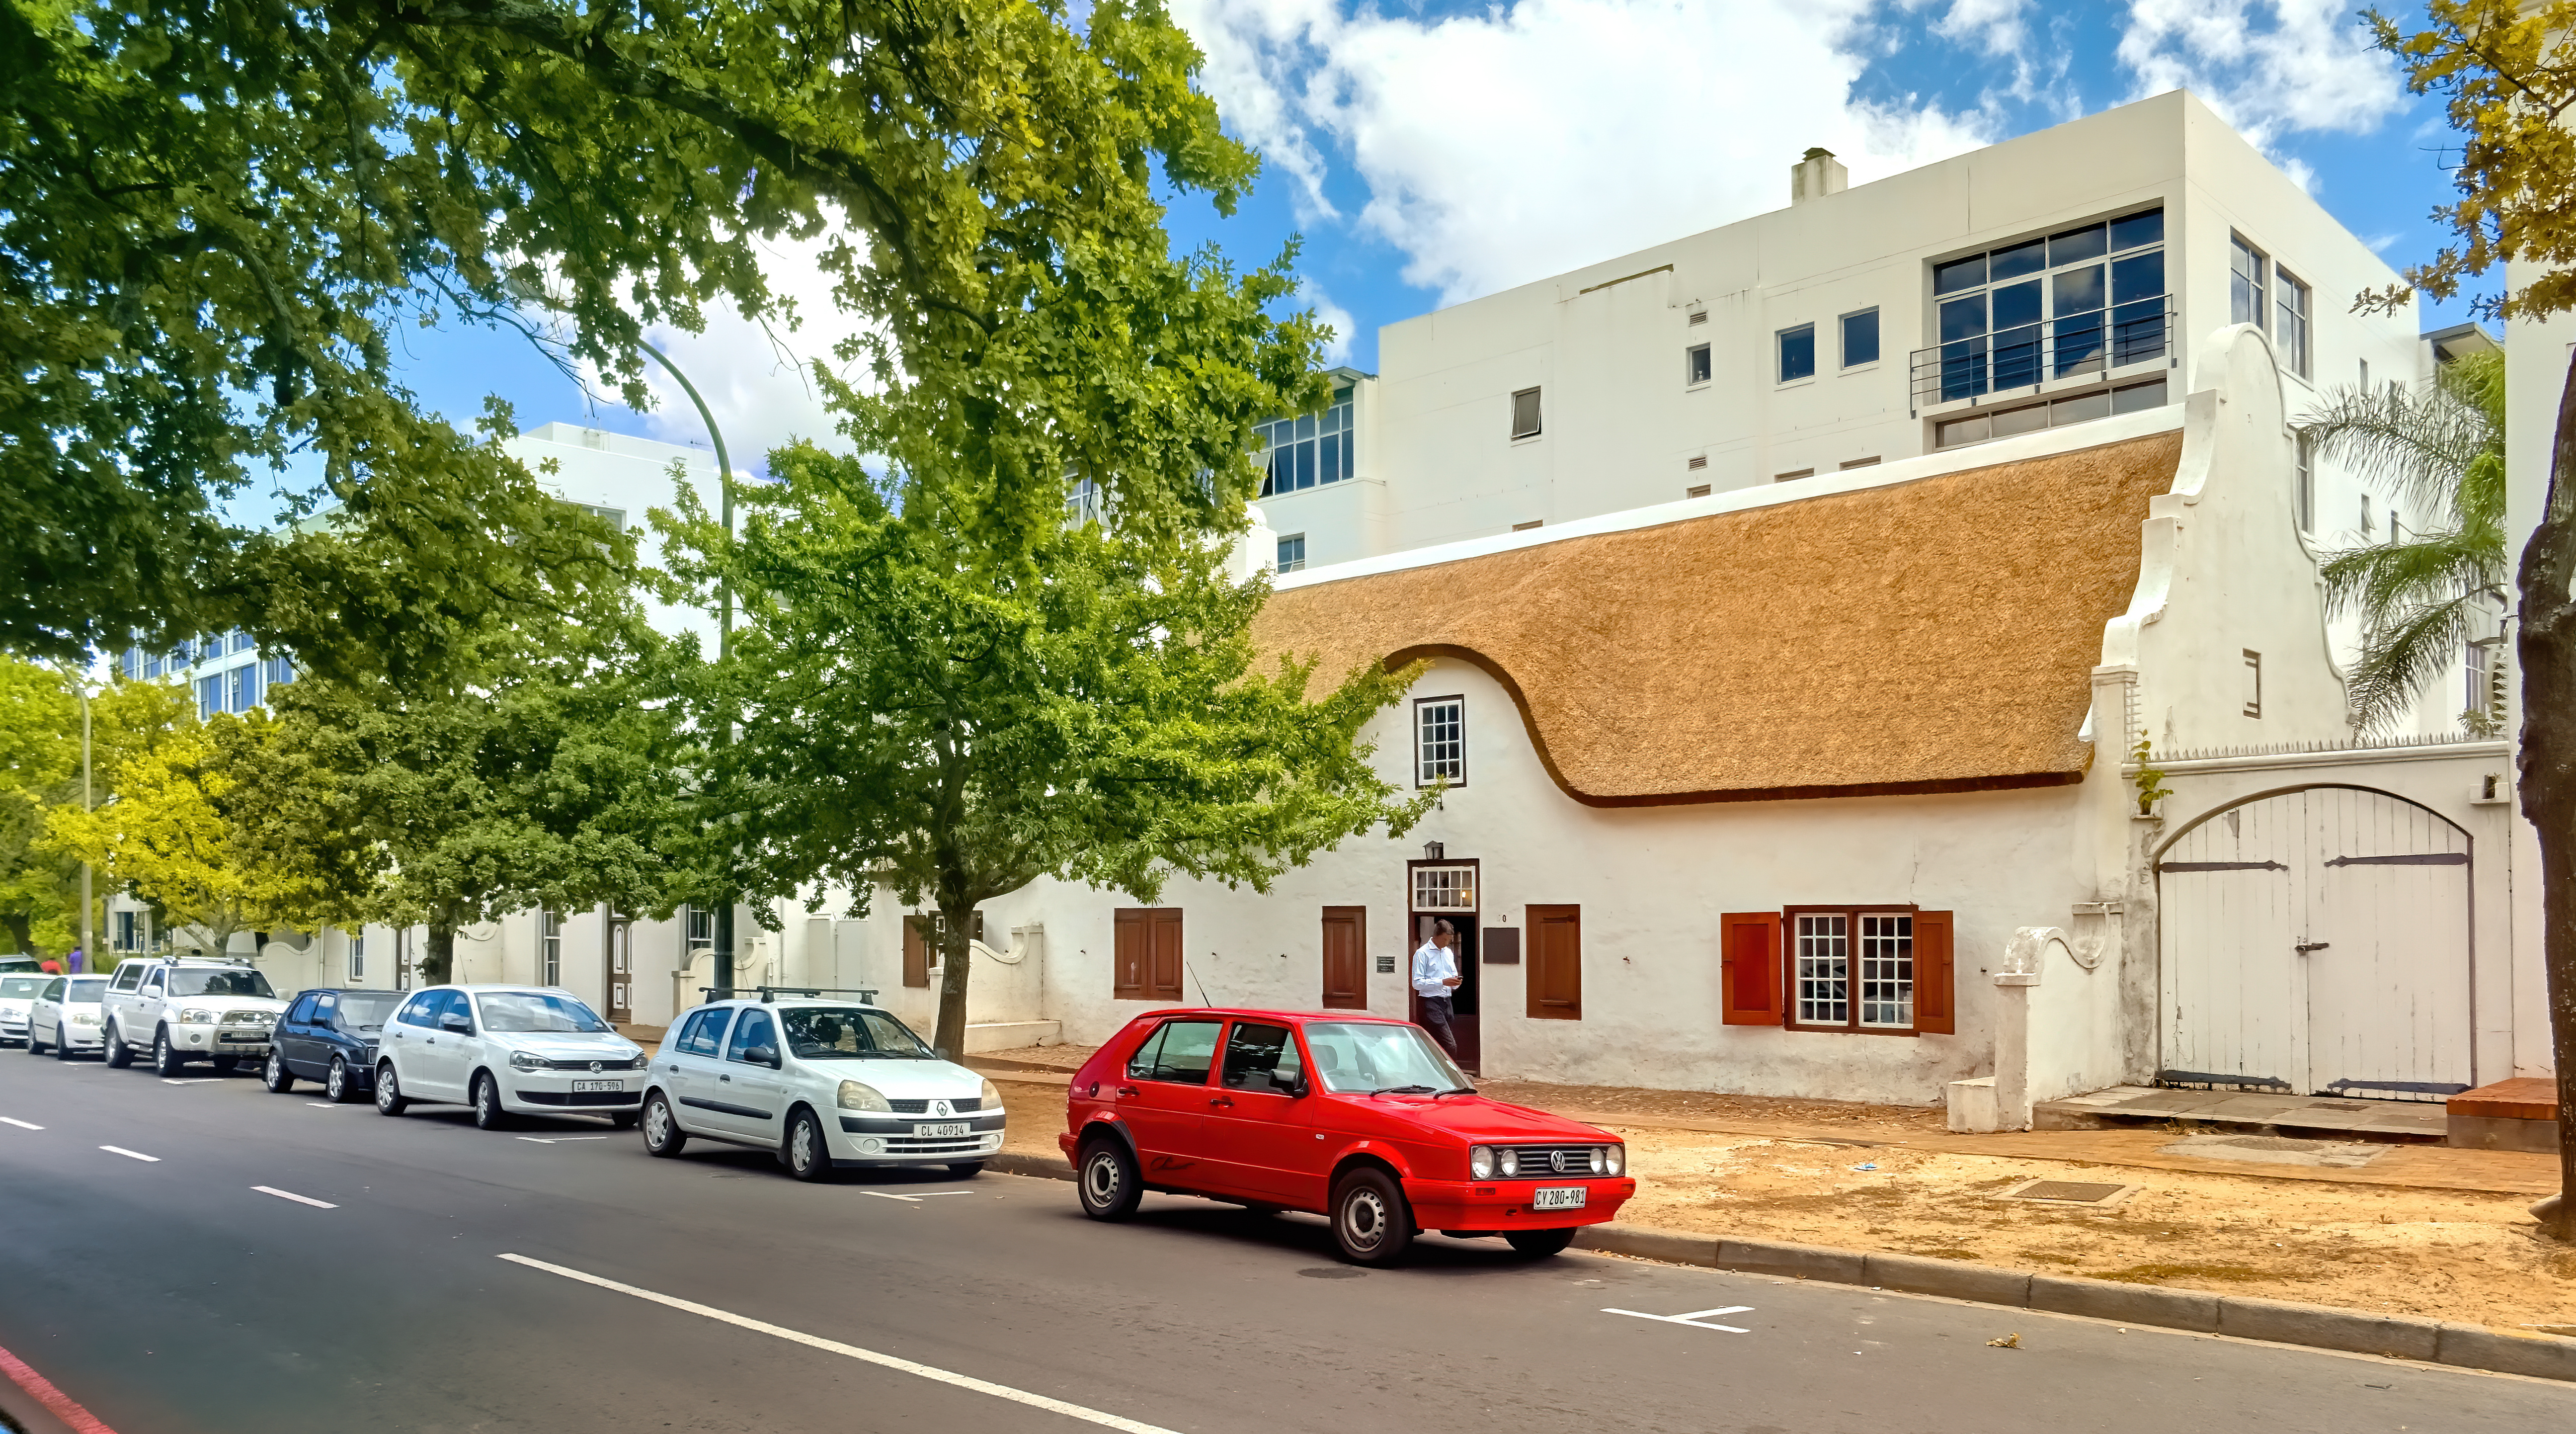 The Western Cape is the beating heart of the South Africa operation. The Stellenbosch office hosts a team of around 90 people responsible for trading, risk management, technology expertise, as well as managing the company’s depots across the country. 